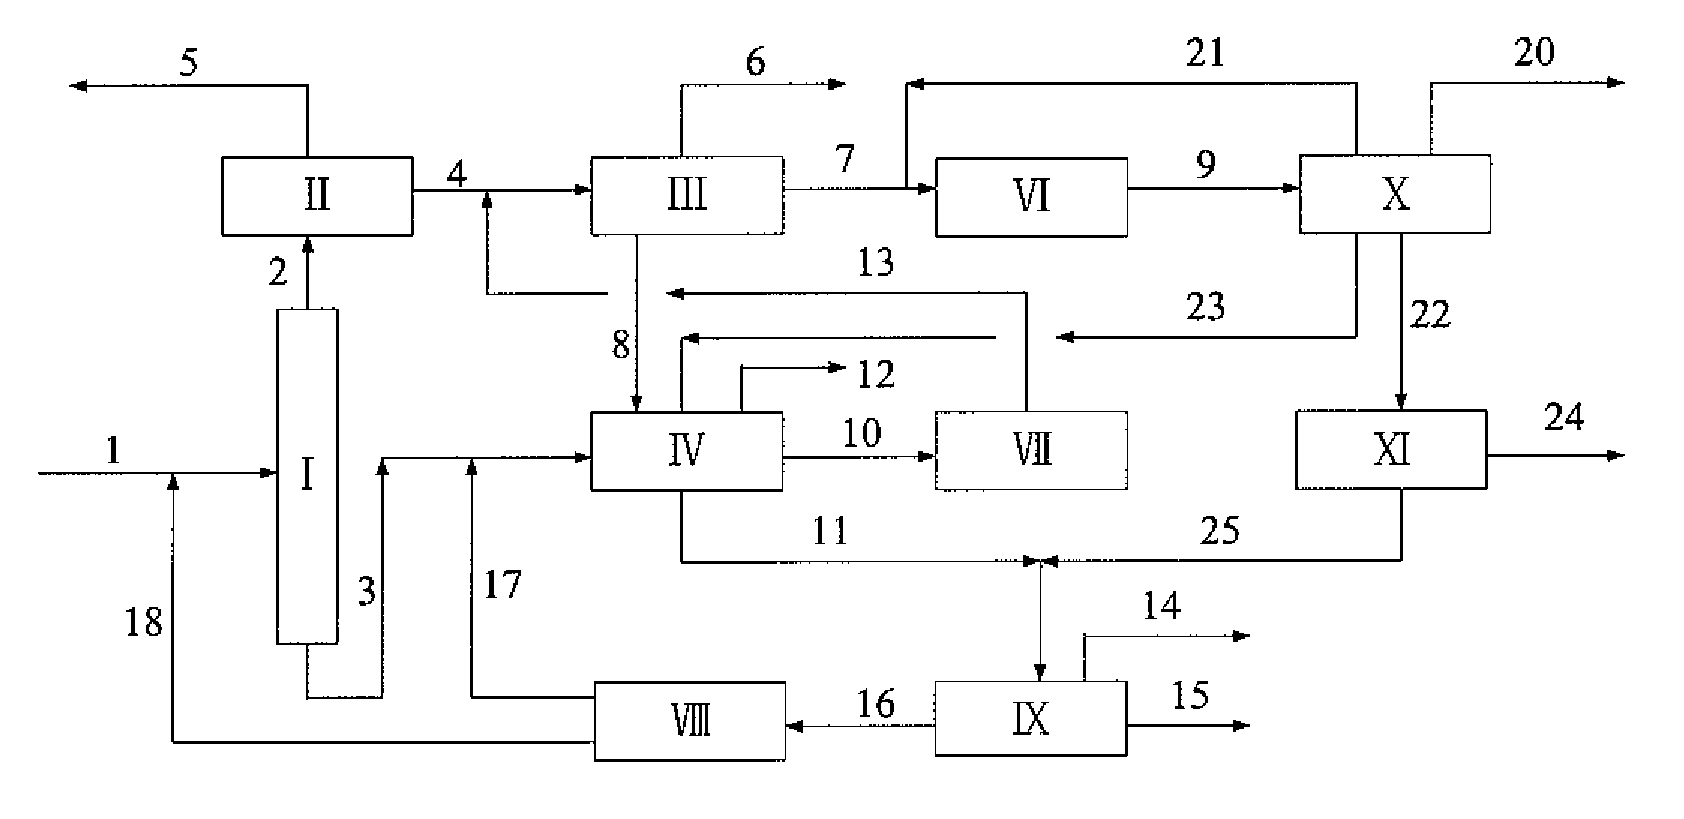 Integrated process for the production of P-xylene